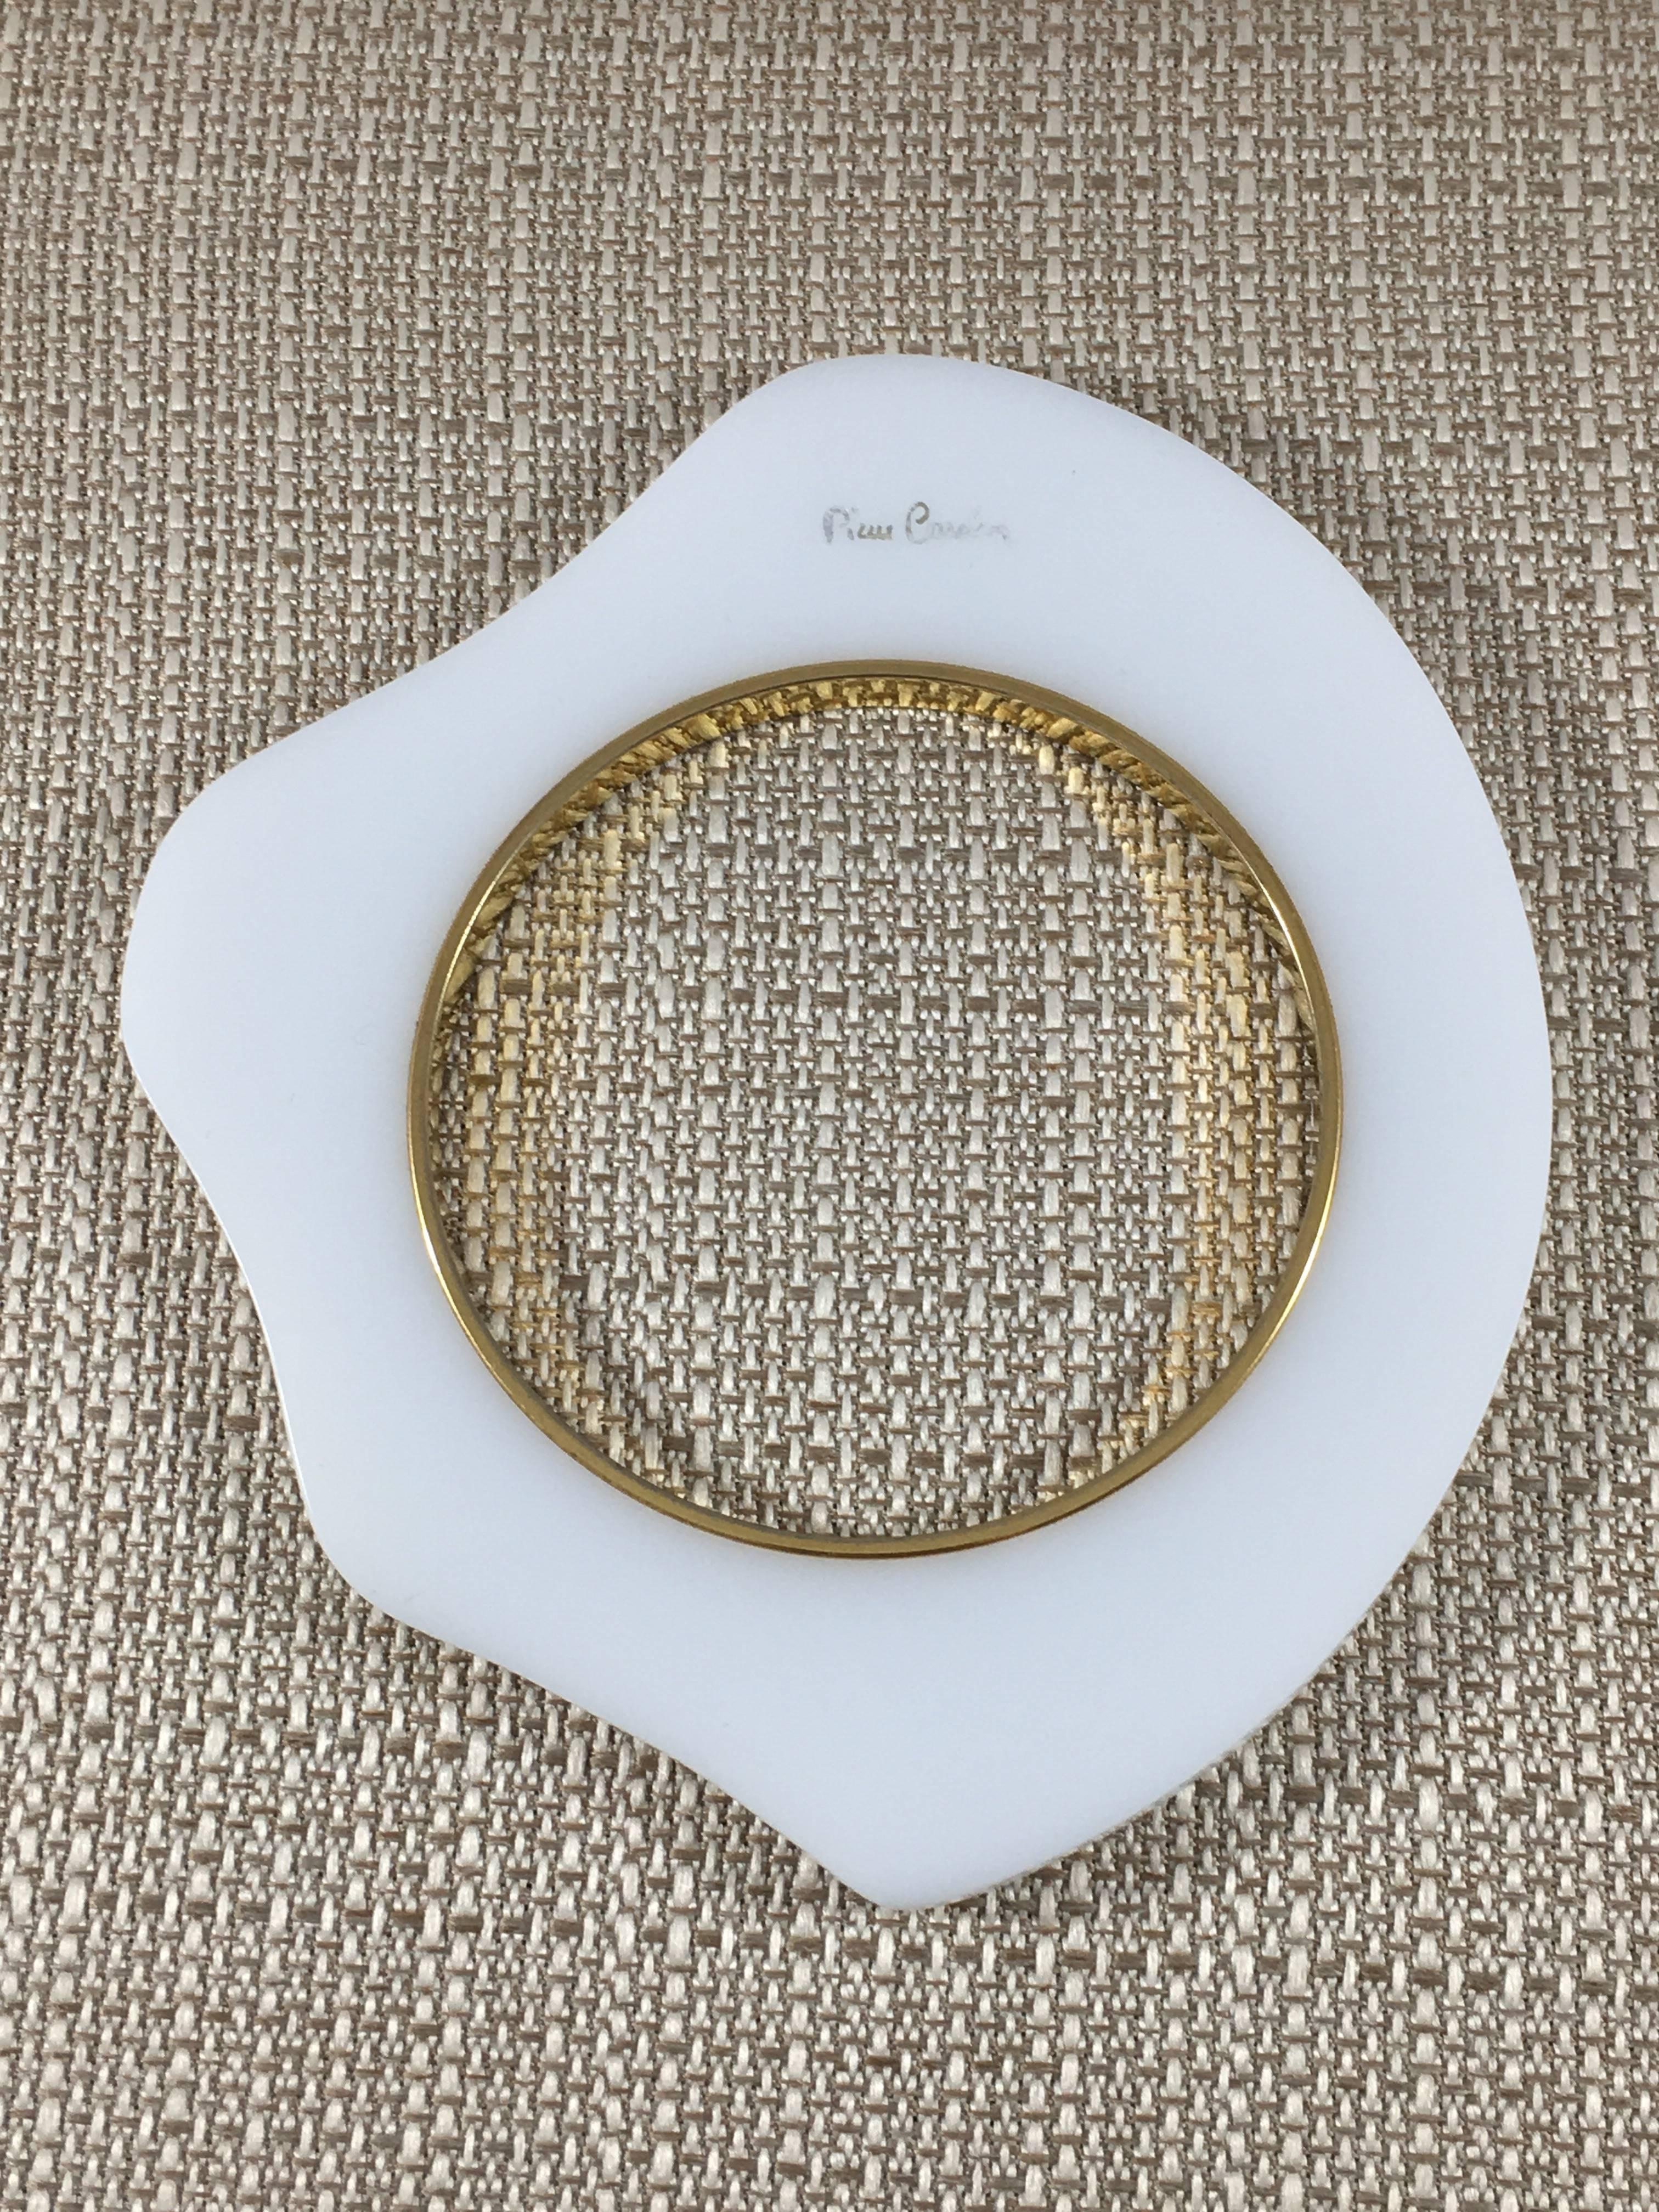 Pierre Cardin 1960s MOD White Resin Bangle Bracelet In Excellent Condition For Sale In Chicago, IL